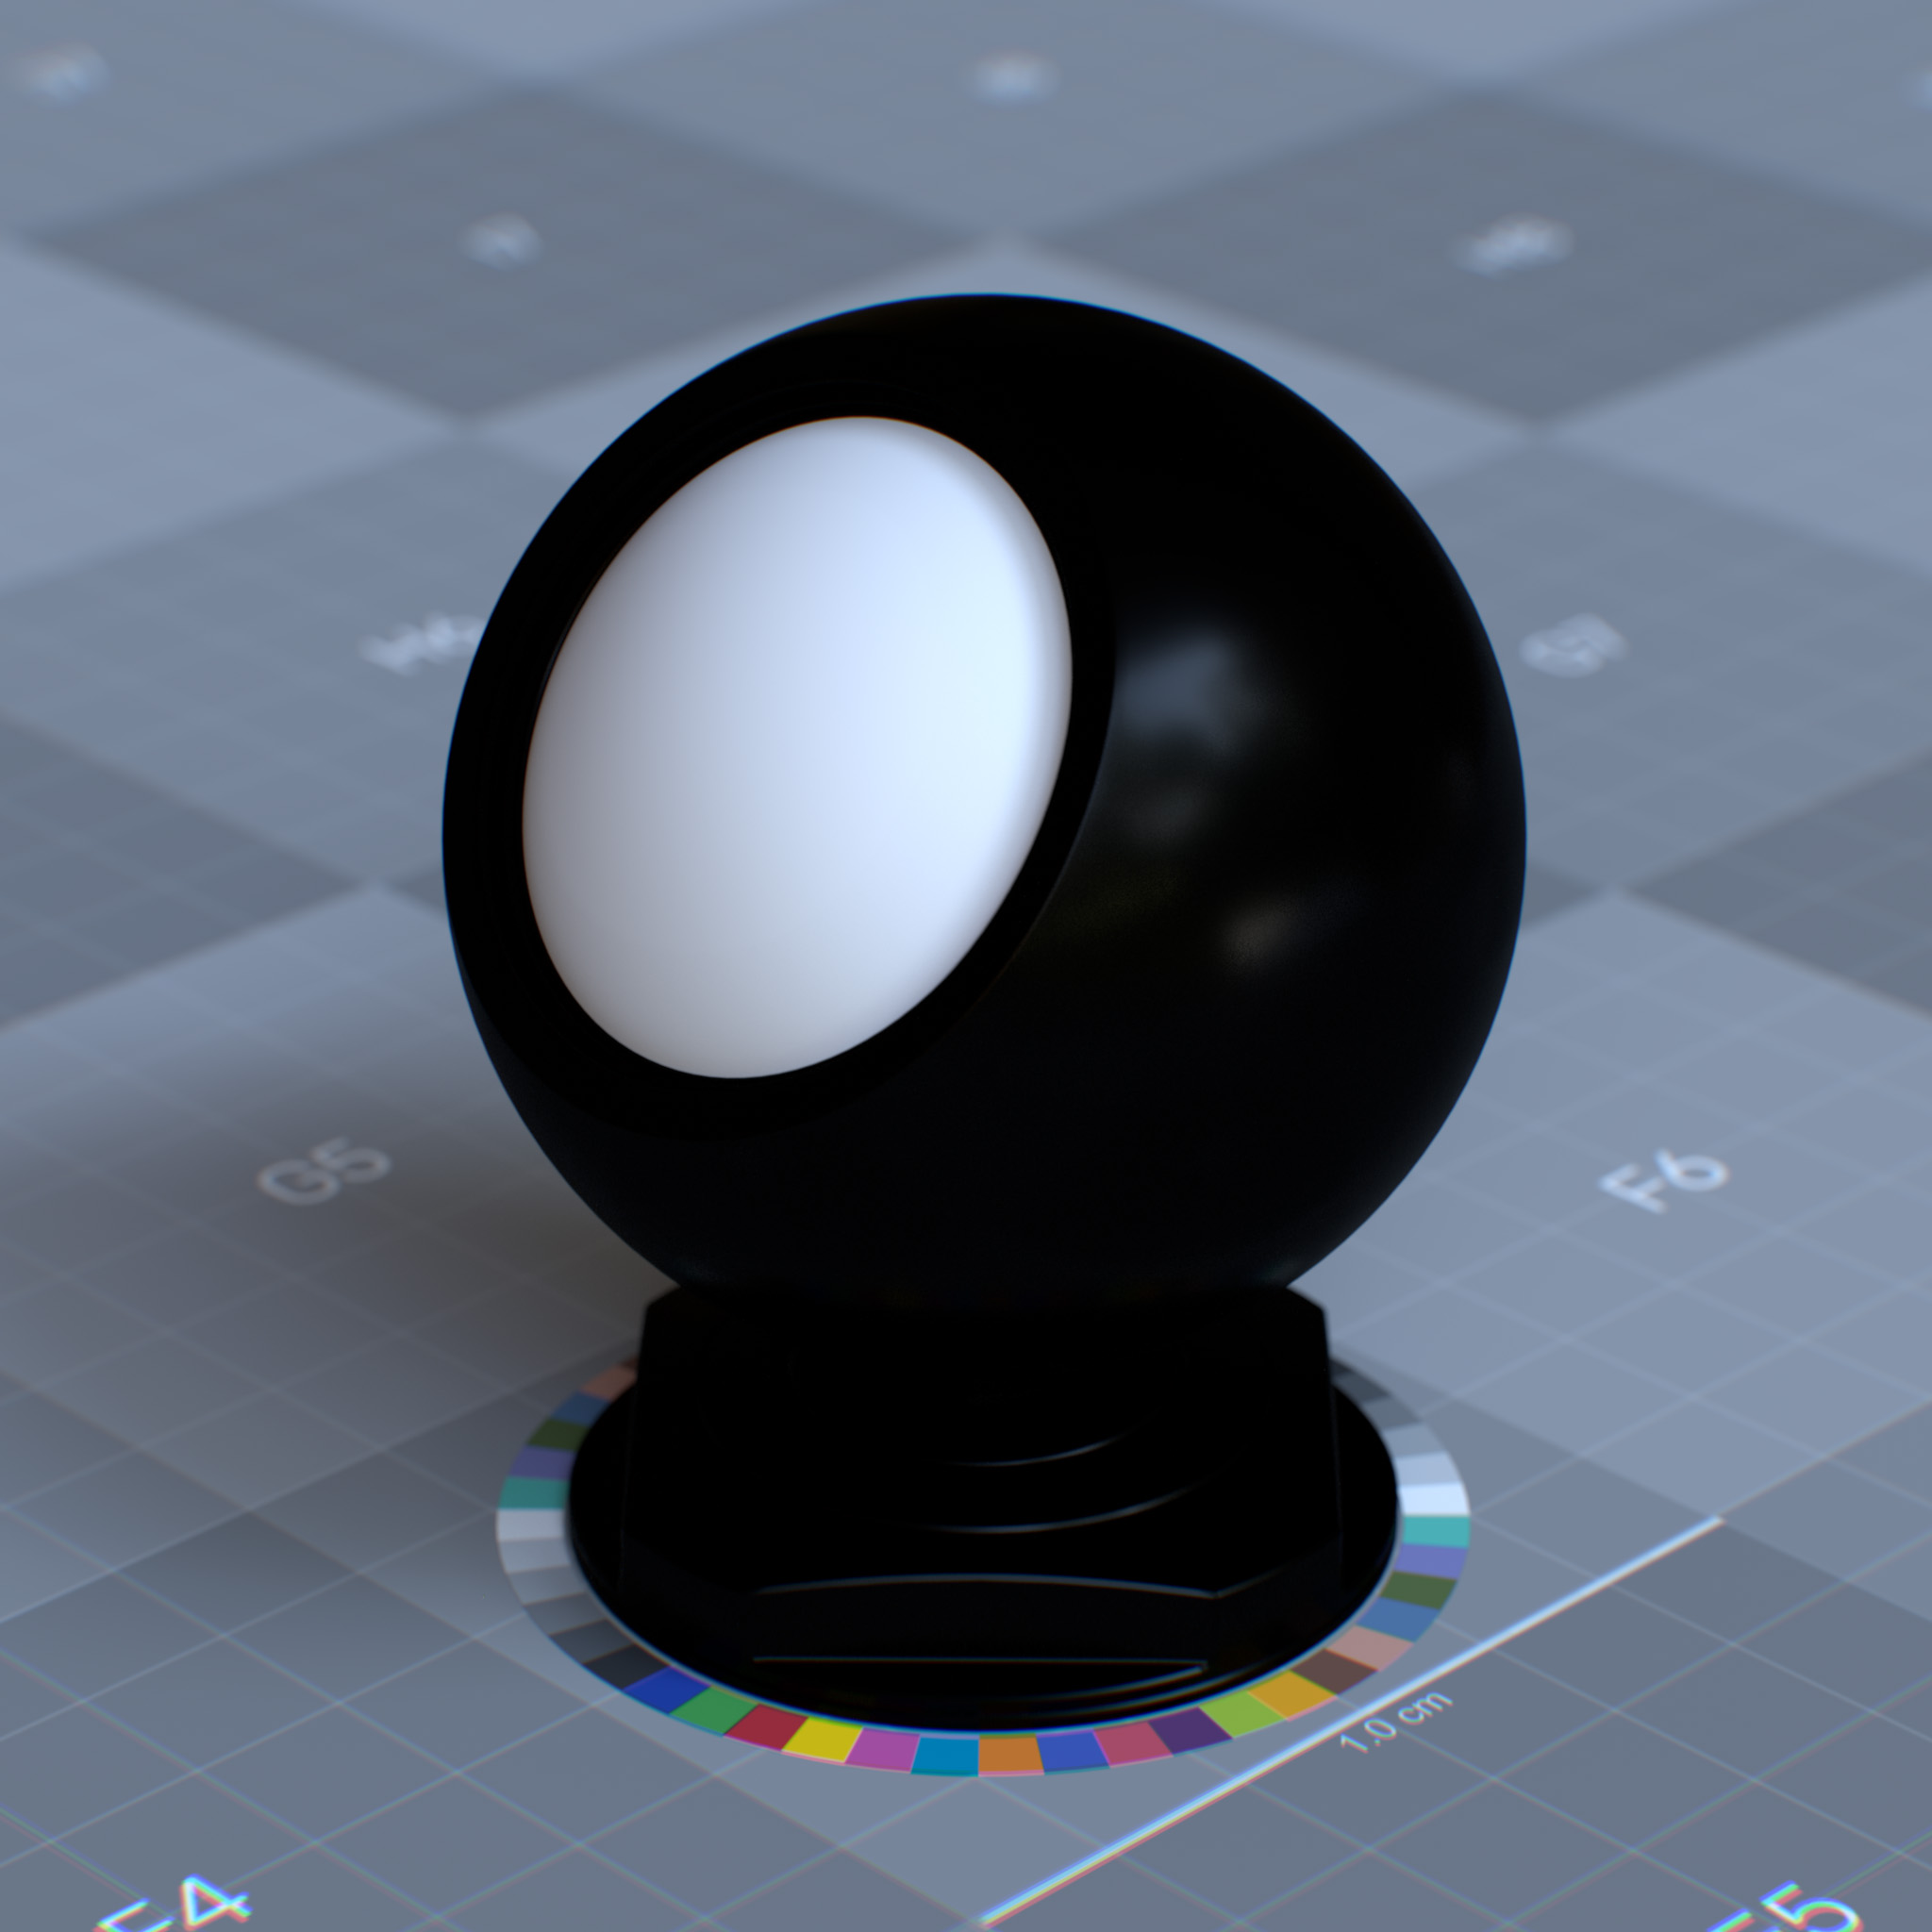 rtx_material_omnisurfacebase_diffuse_reflection_weight_0p0